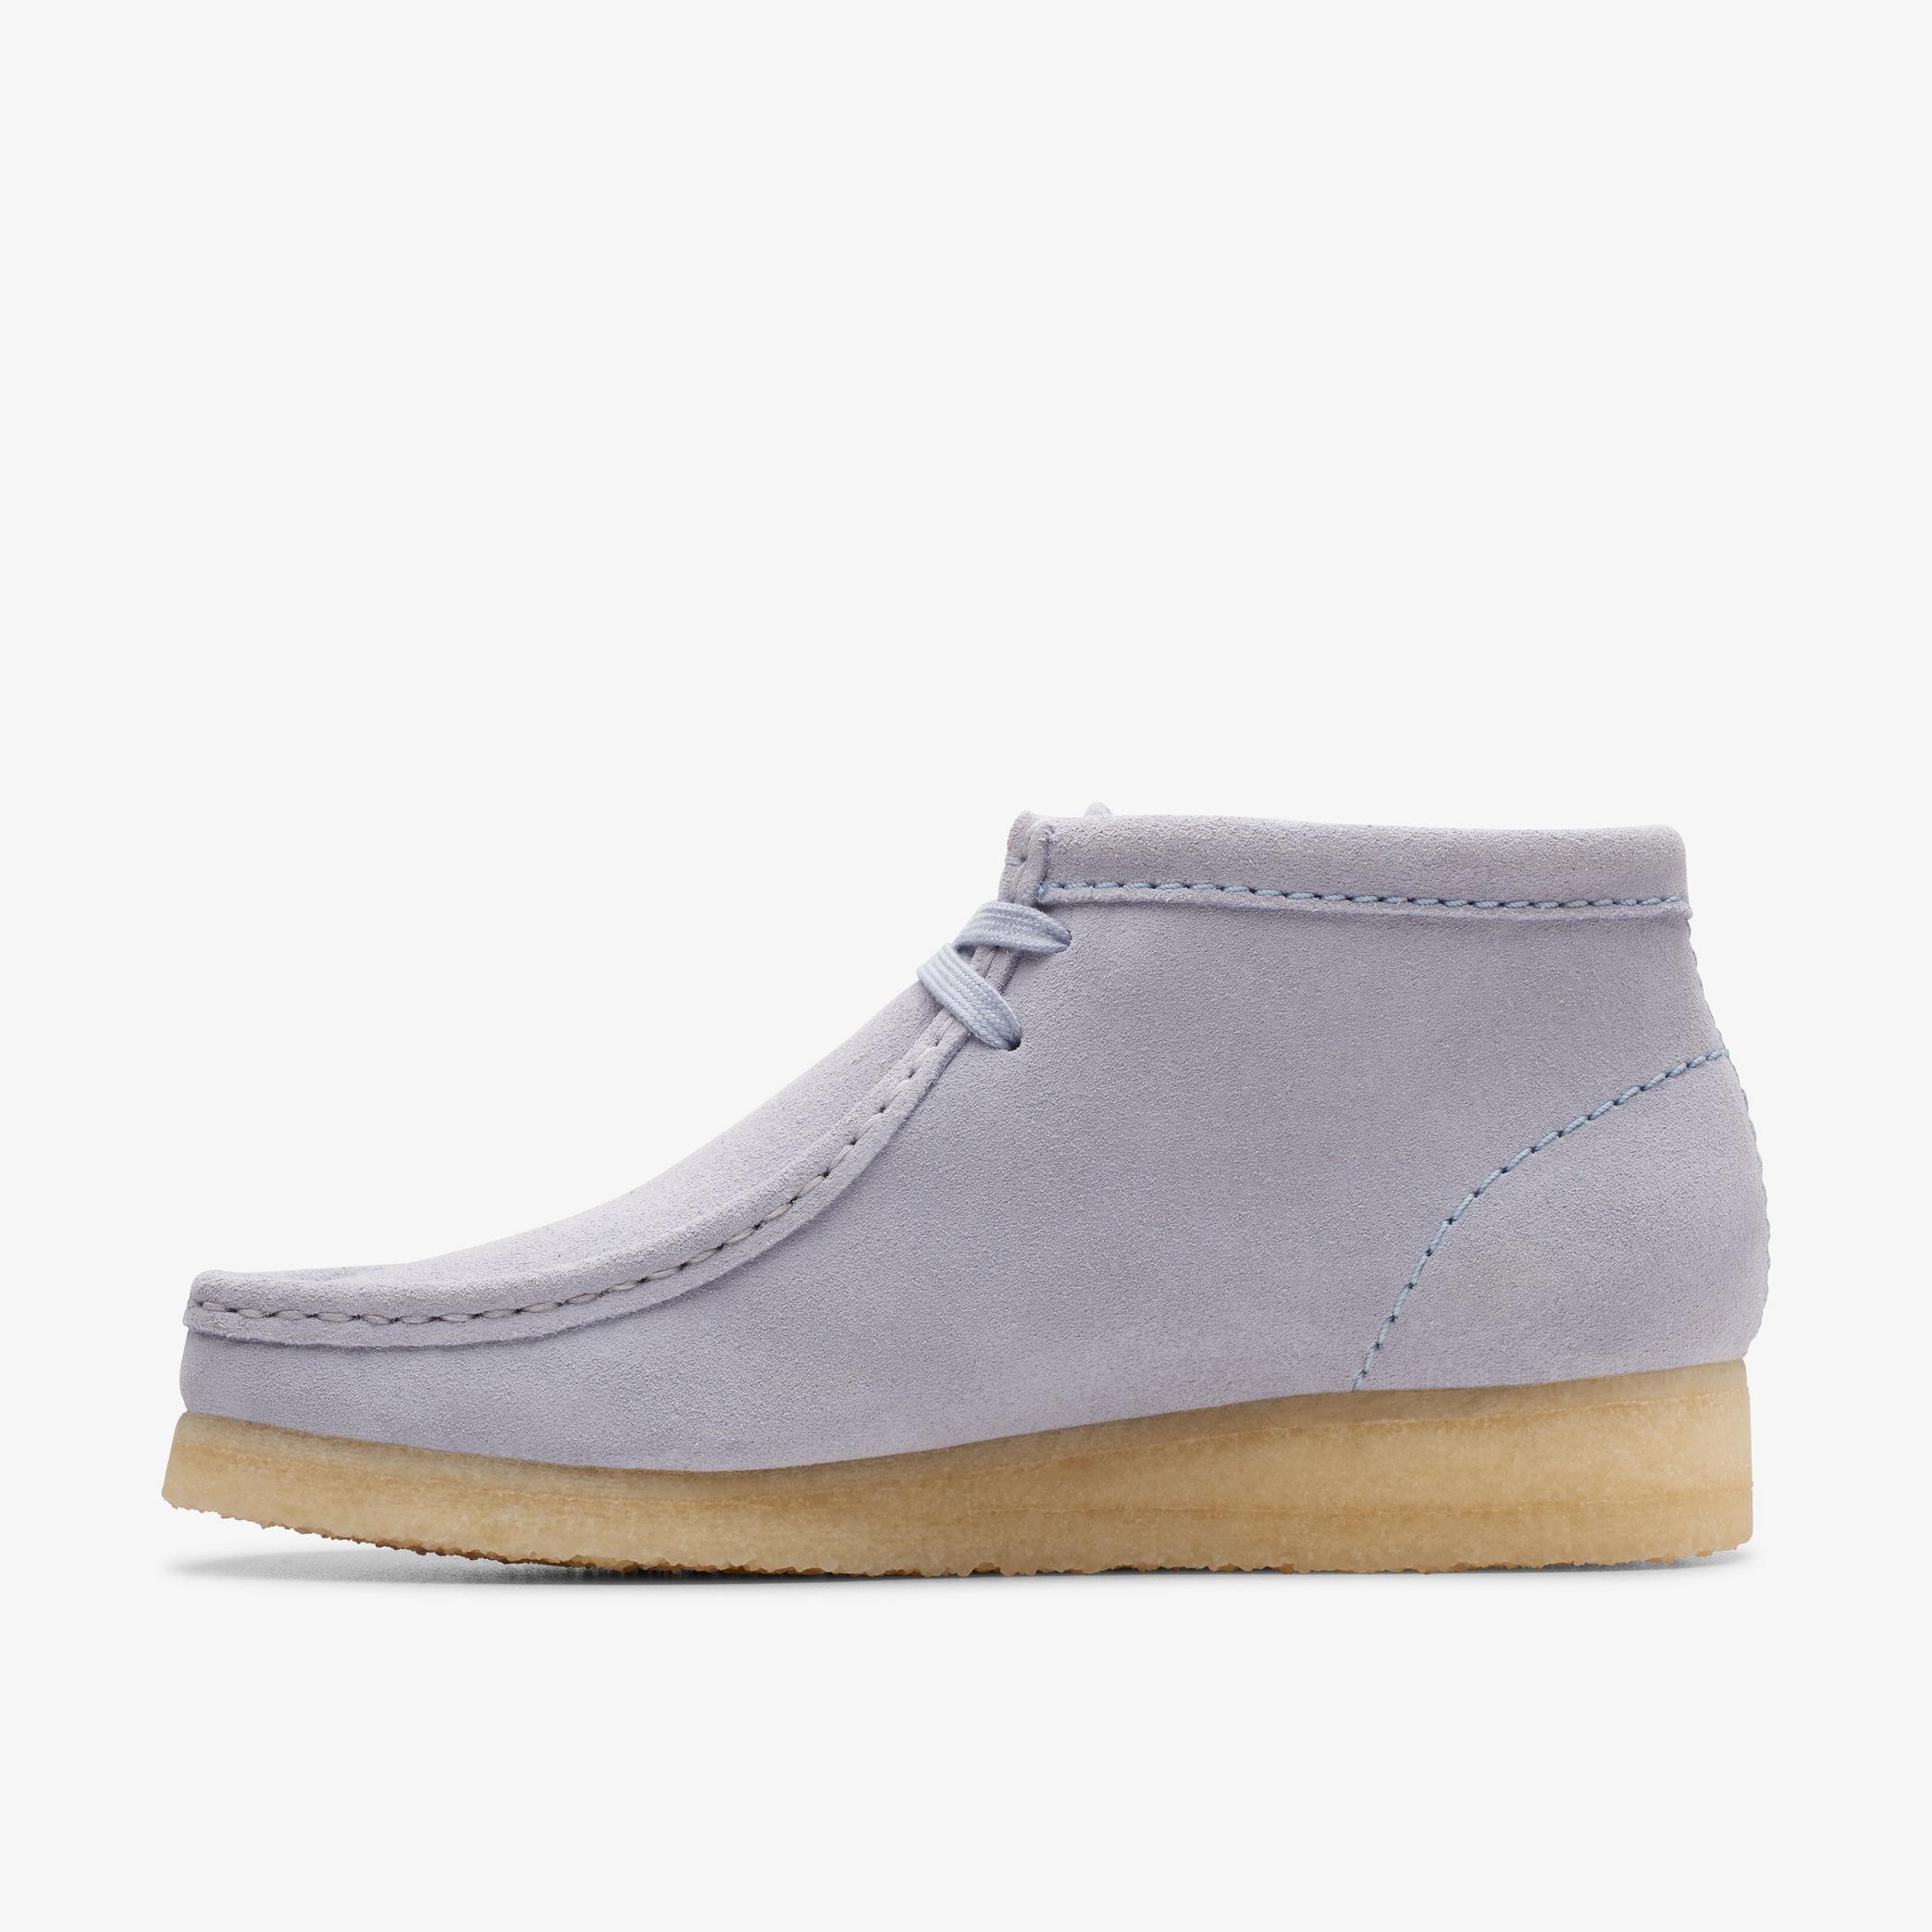 Wallabee Boot Cloud Grey Suede Wallabee, view 2 of 7